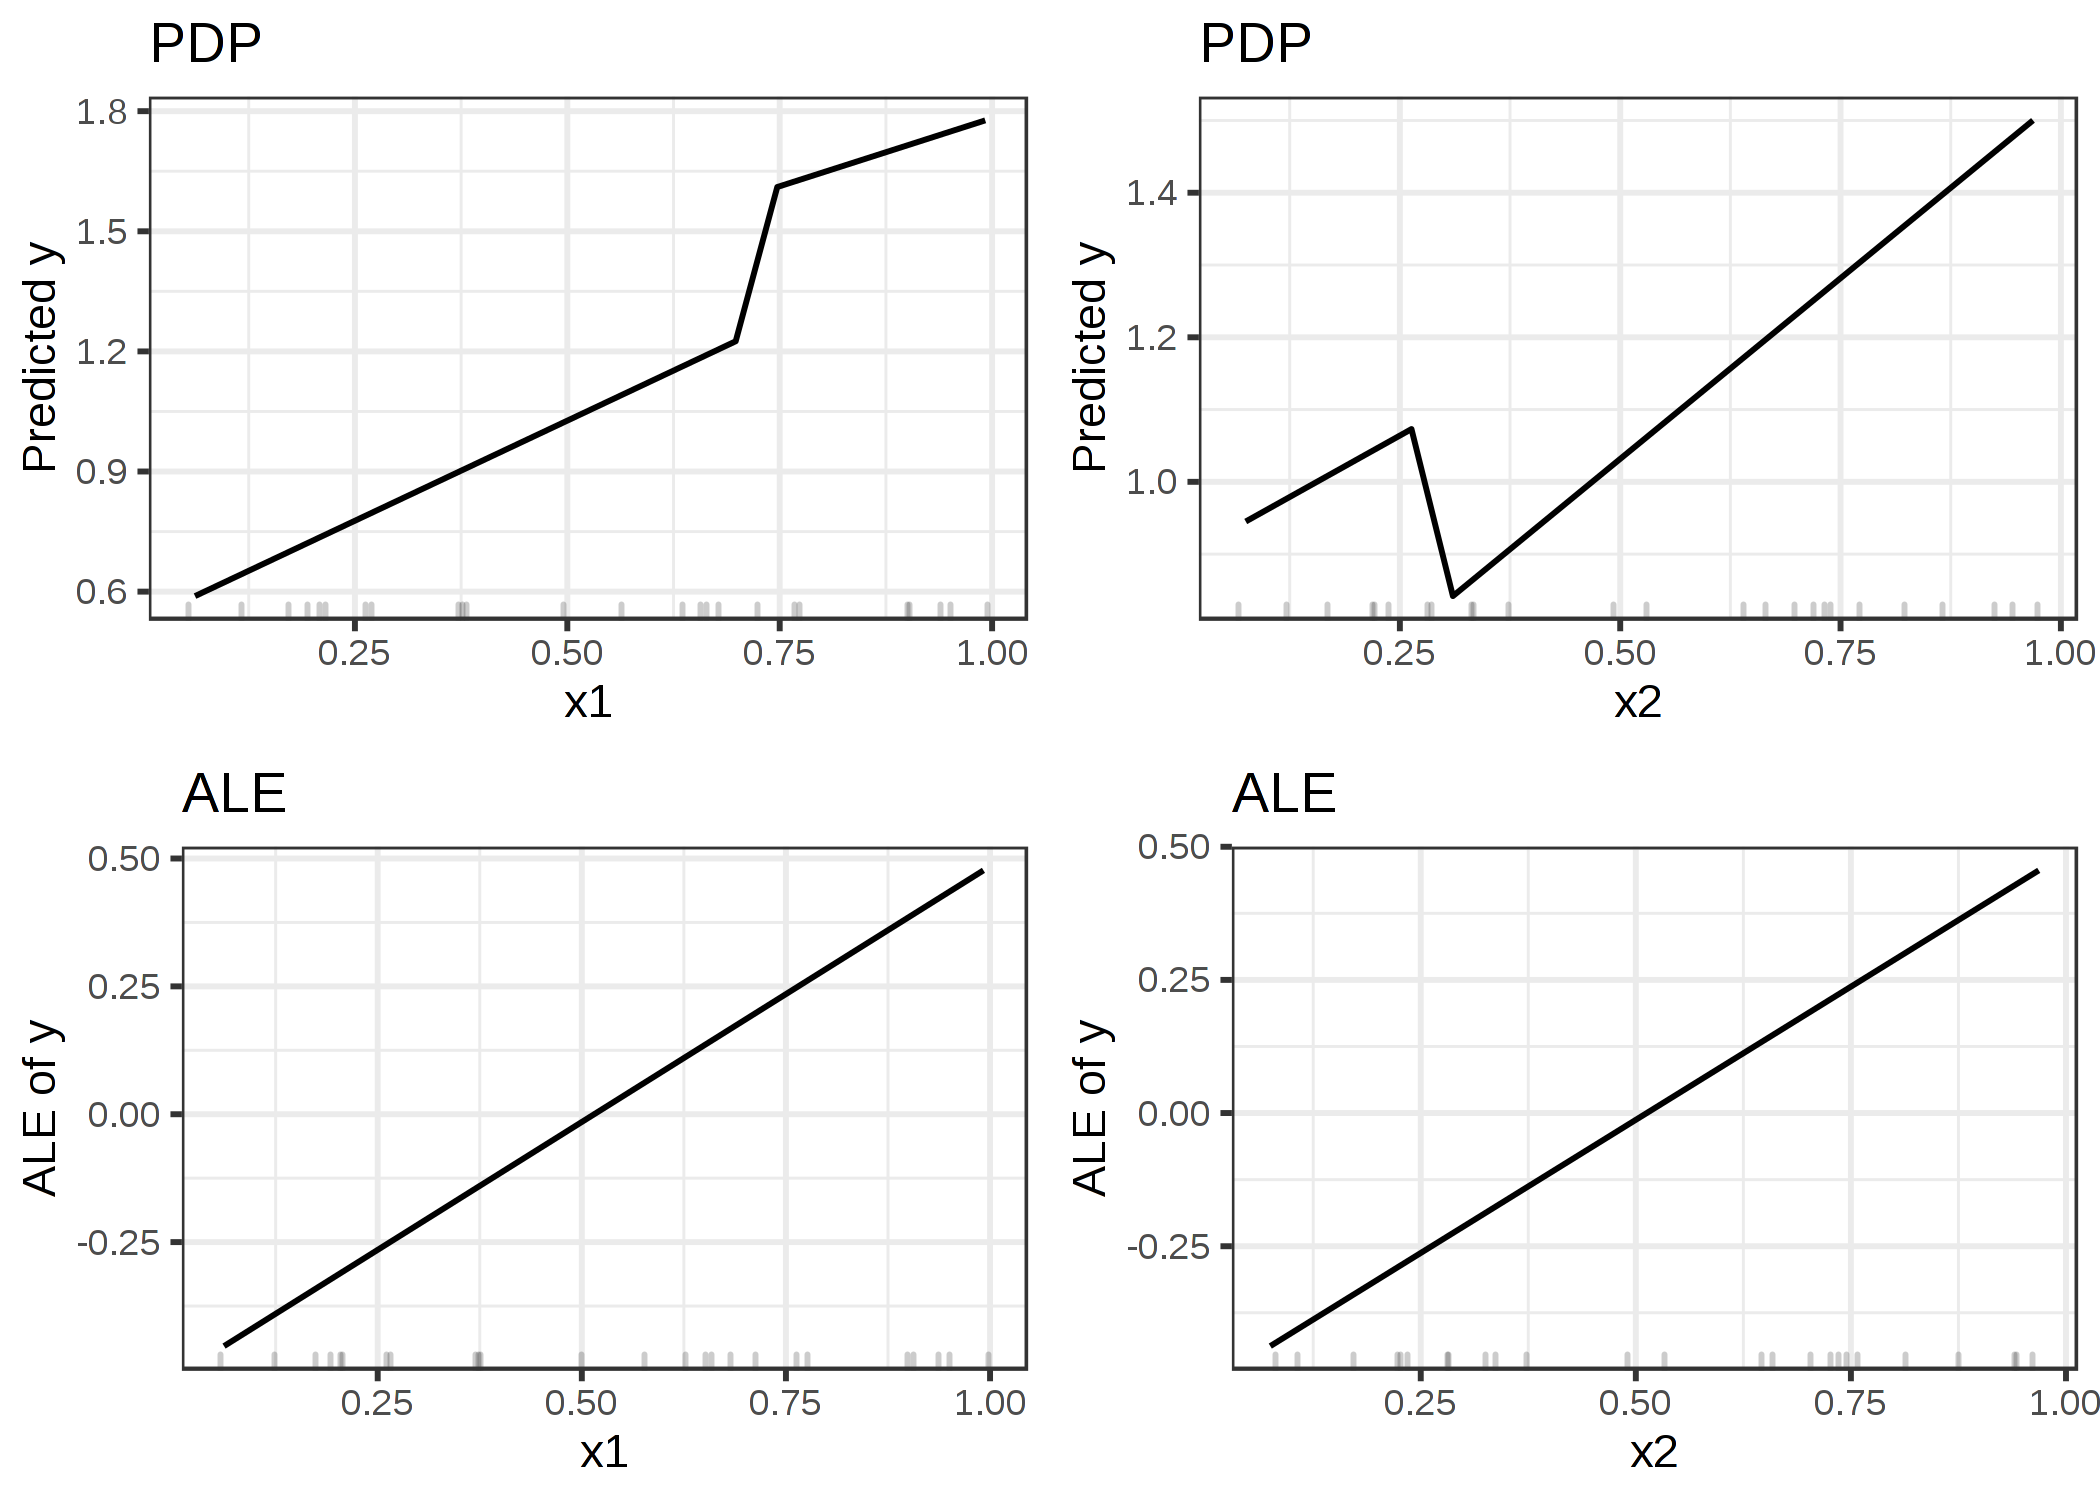 Comparison of the feature effects computed with PDP (upper row) and ALE (lower row). The PDP estimates are influenced by the odd behavior of the model outside the data distribution (steep jumps in the plots). The ALE plots correctly identify that the machine learning model has a linear relationship between features and prediction, ignoring areas without data.